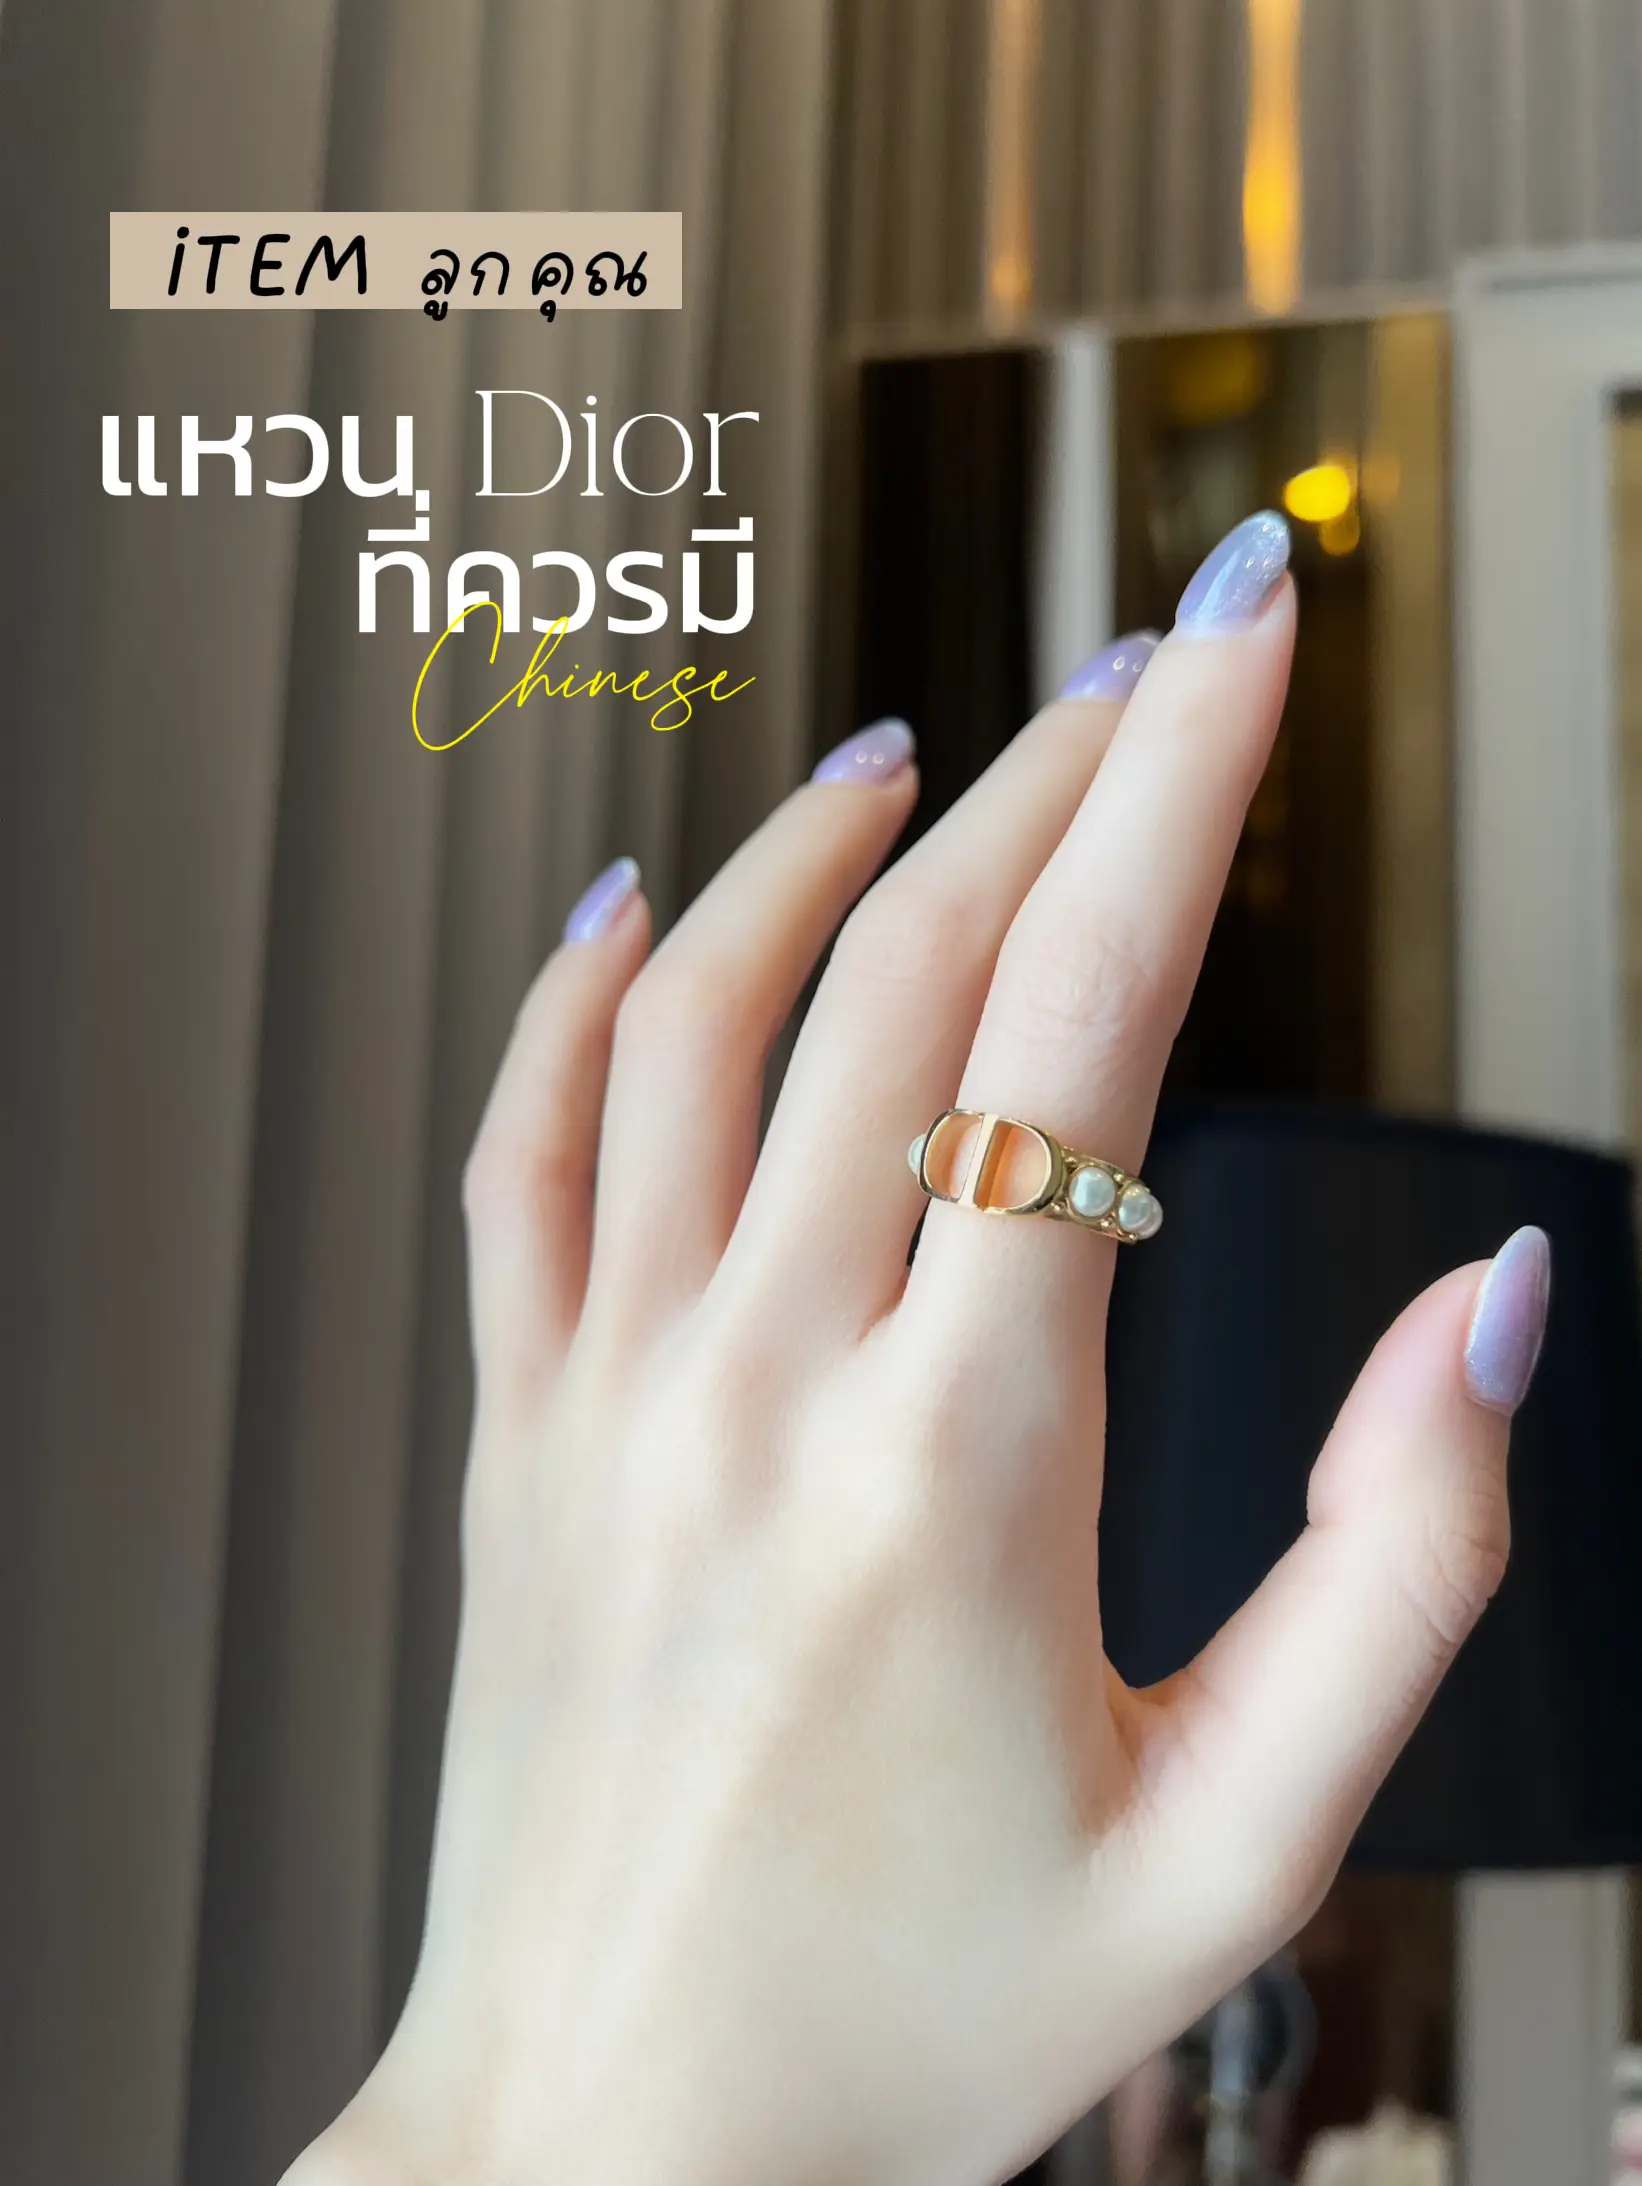 Dior Nails #Dior inspired play with stickers 